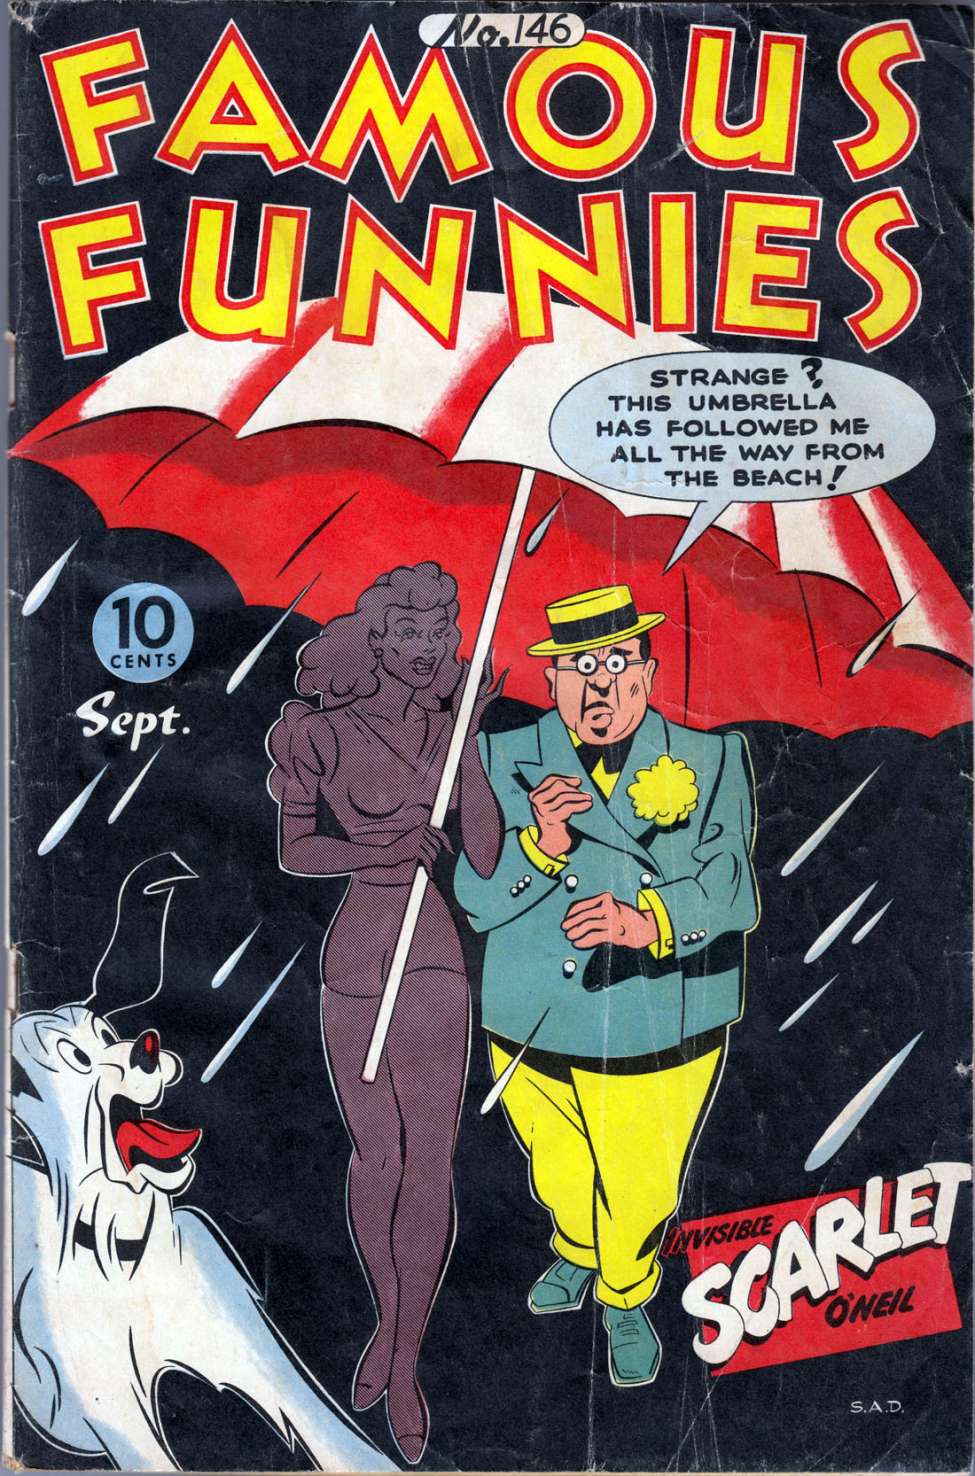 Book Cover For Famous Funnies 146